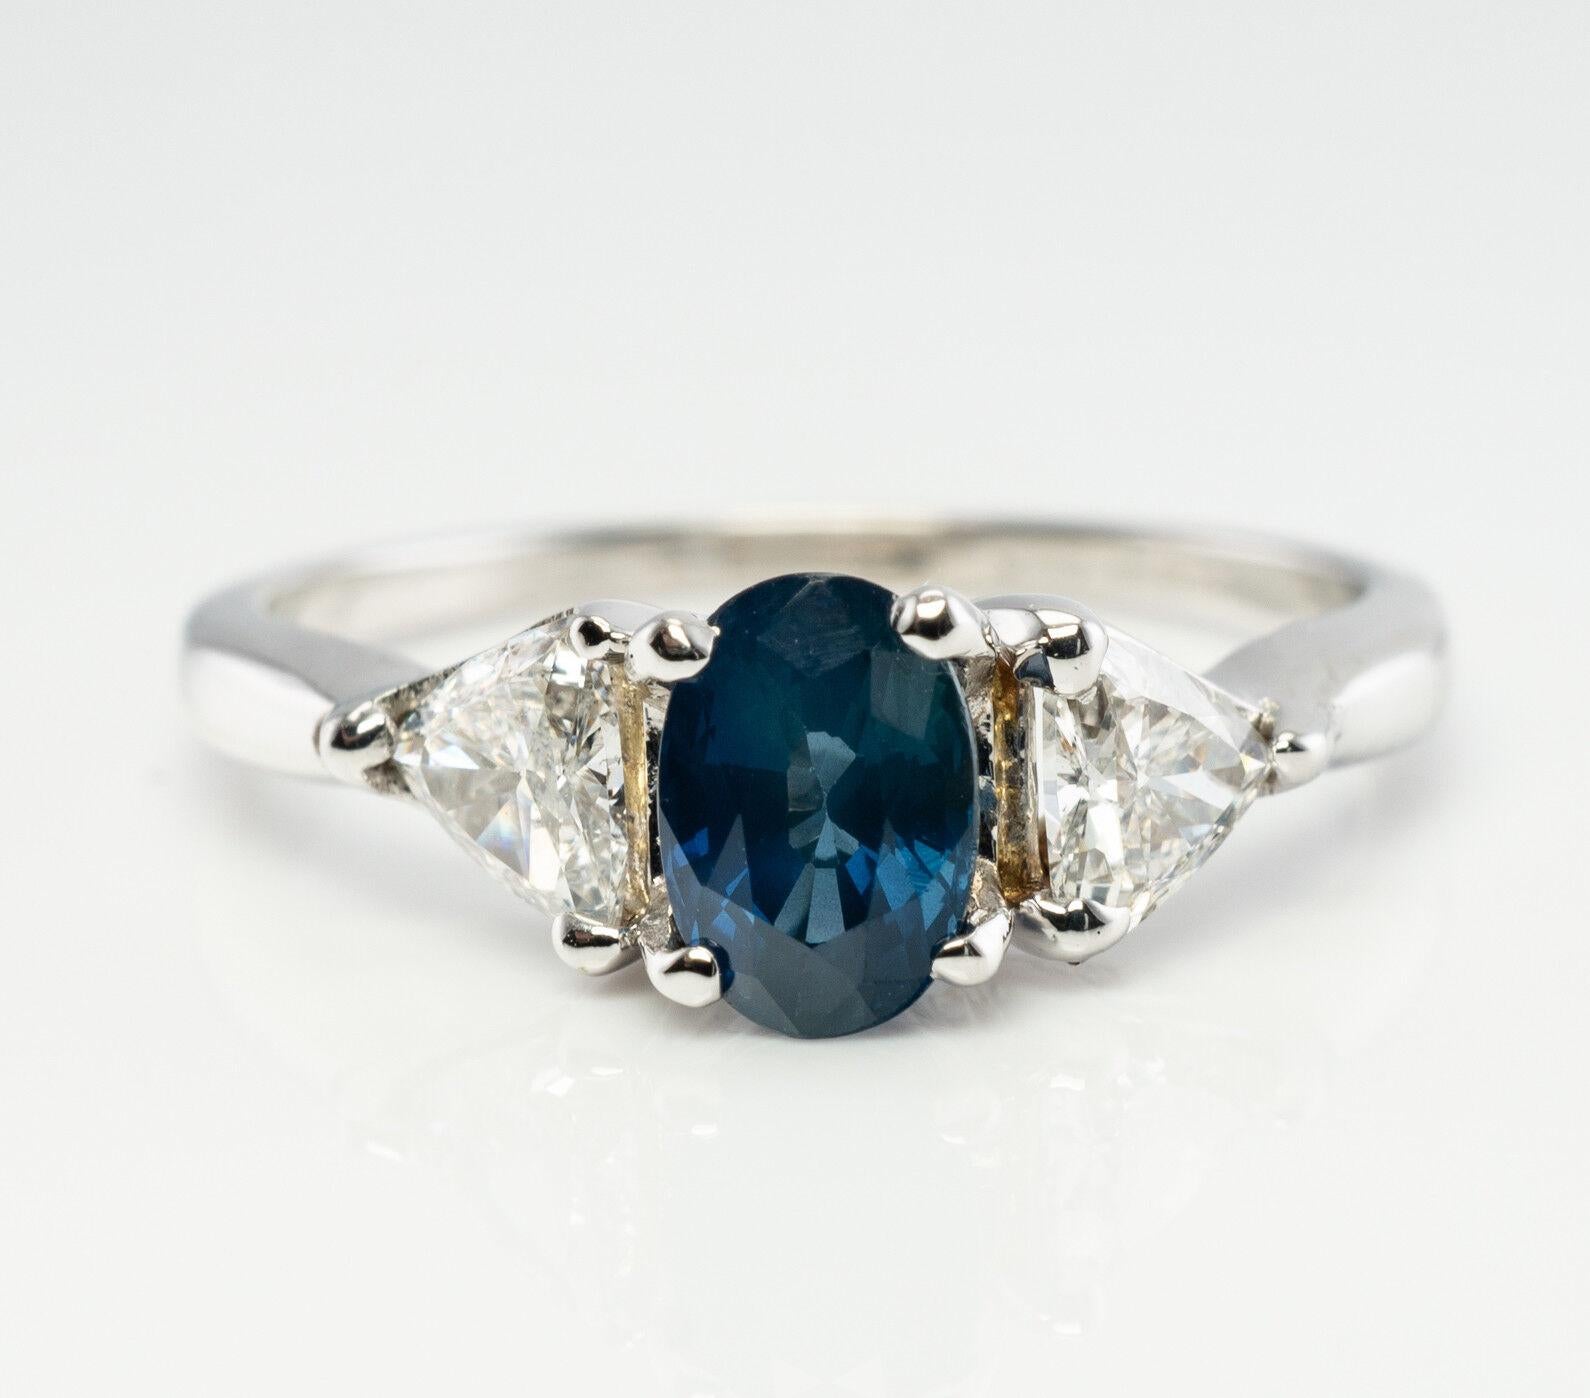 This beautiful estate ring is finely crafted in solid 14K White Gold (carefully tested and guaranteed), and set with genuine Earth mined Sapphire and trillion cut diamonds. The center gem measures 6mm x 4mm (.60 carat). Two trillion cut diamonds